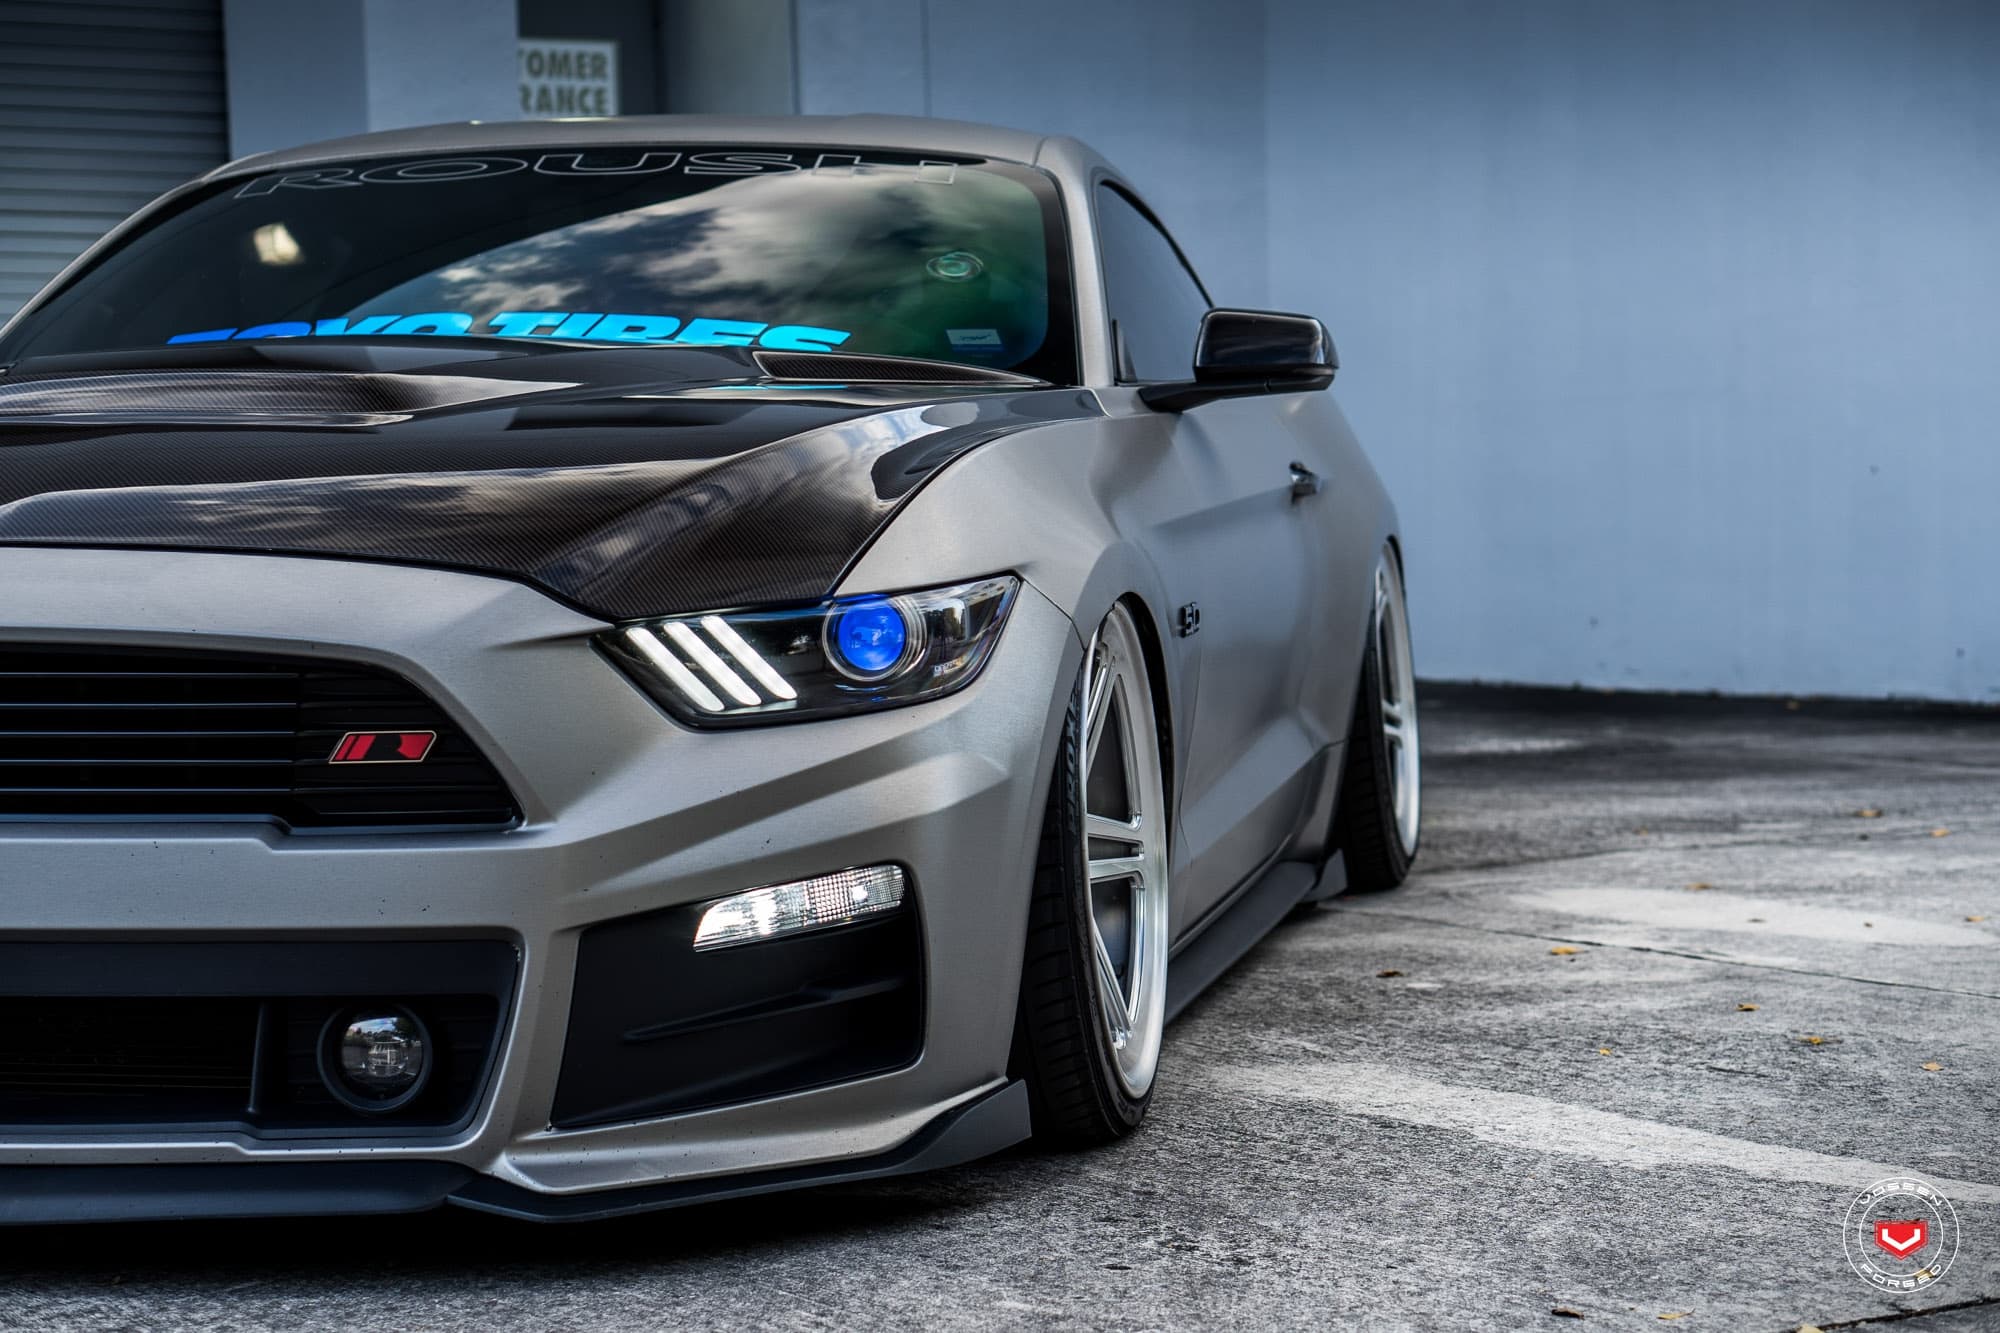 32 Best Ford mustang wallpaper ideas | ford mustang wallpaper, ford mustang,  mustang